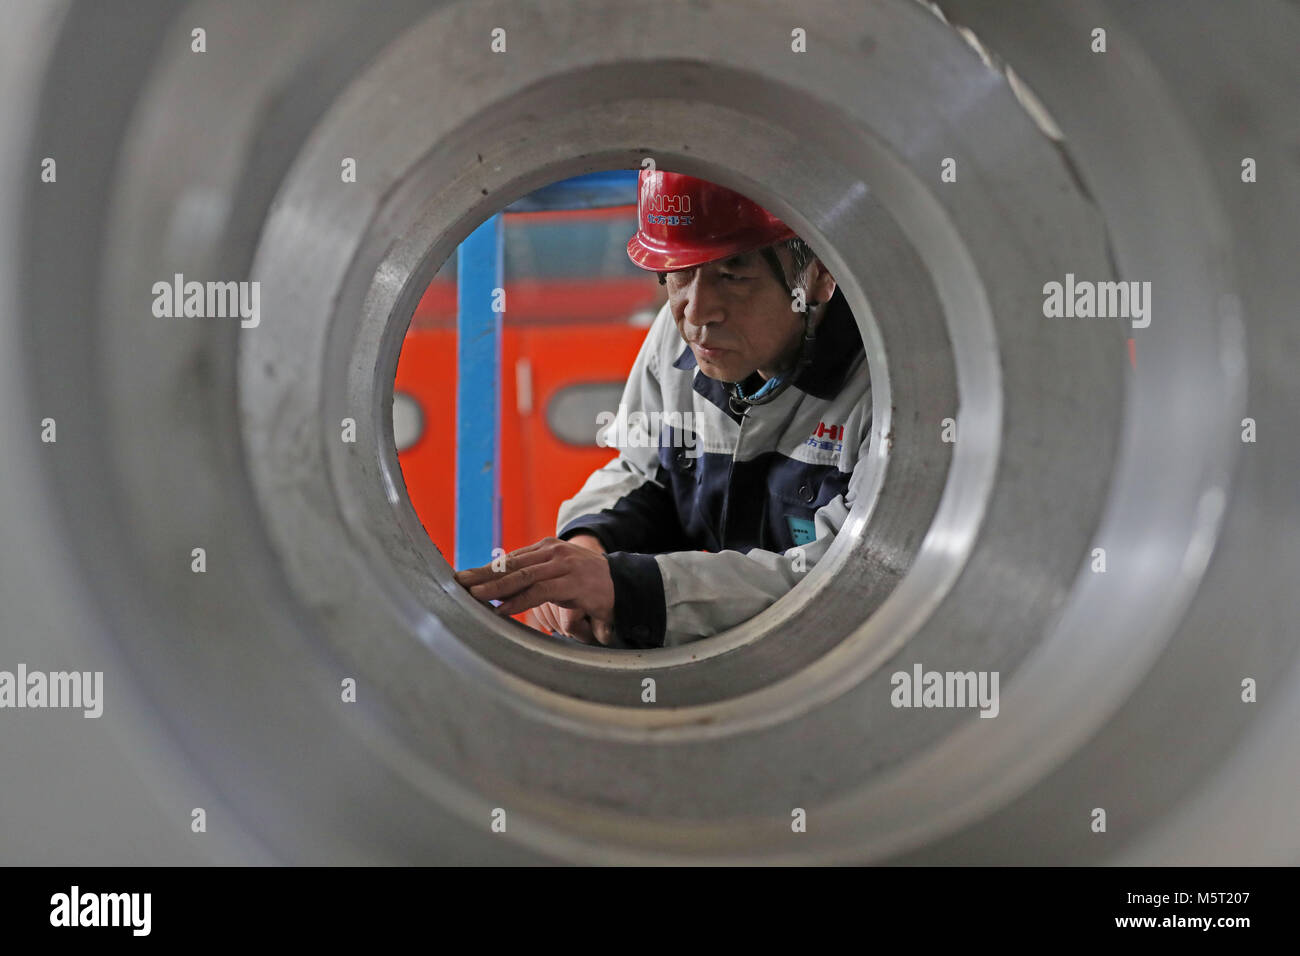 (180226) -- BEIJING, Feb. 26, 2018 (Xinhua) -- Mi Zhongyi, newly-elected deputy to the 13th National People's Congress, works at a workshop of Transmission Equipment Company of Northern Heavy Industries Group Co., Ltd. in Shenyang, northeast China's Liaoning Province, Feb. 23, 2018. Mi said that workers' attention to detail provides the foundation for innovation. China's annual political sessions of the National People's Congress (NPC) and the National Committee of the Chinese People's Political Consultative Conference (CPPCC) are scheduled to convene in March, 2018. During the two sessions, d Stock Photo